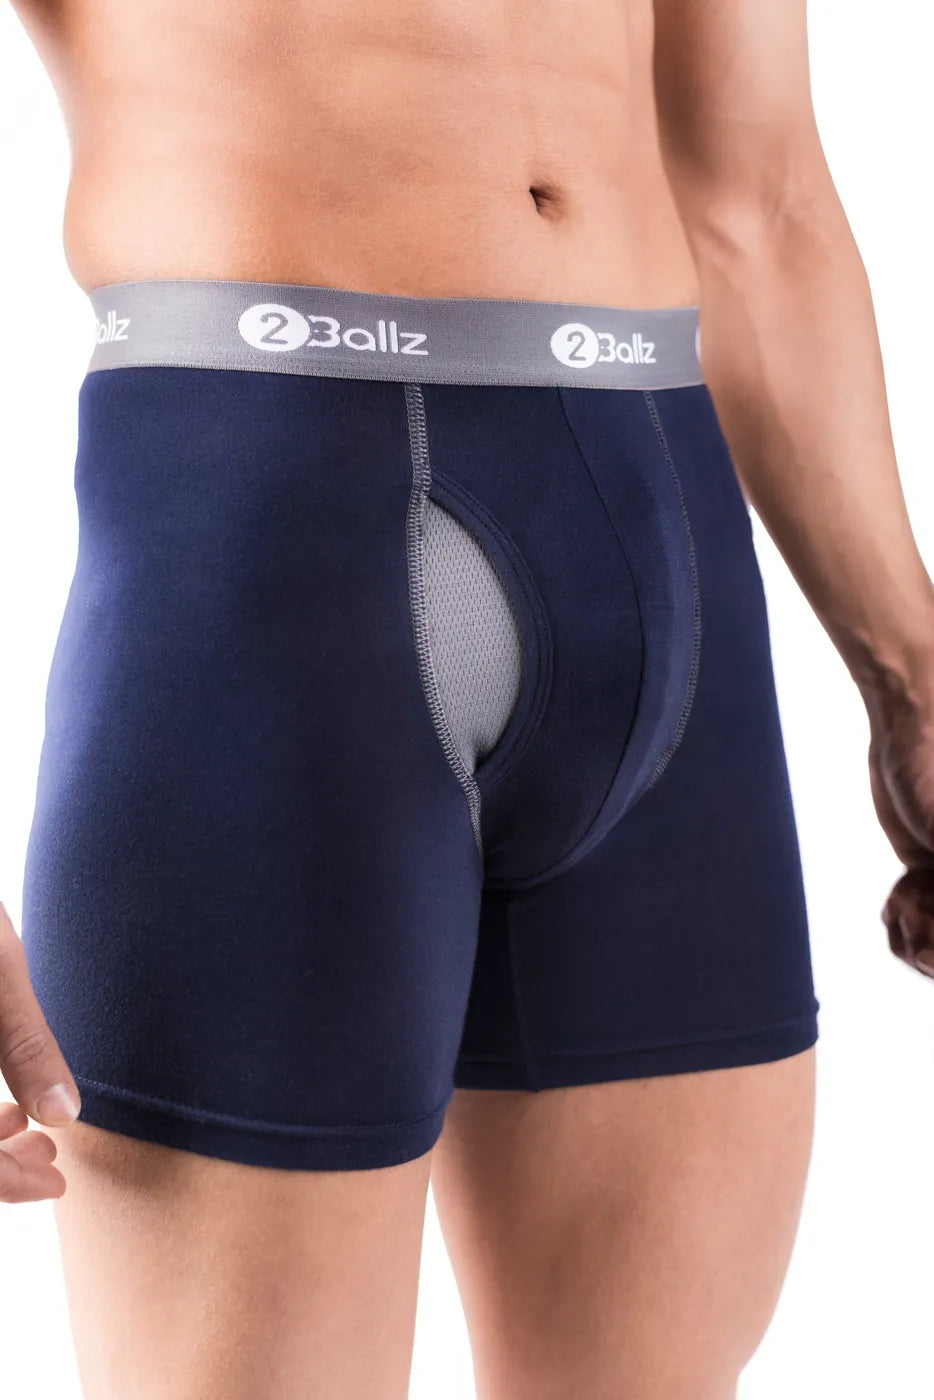 2BALLZ Men's Underwear Pouch Boxer Briefs Breathable Micro-Modal Fabric  Antimicrobial for Balls & Roll Resistant Waistband Inner Wears, (M, Navy